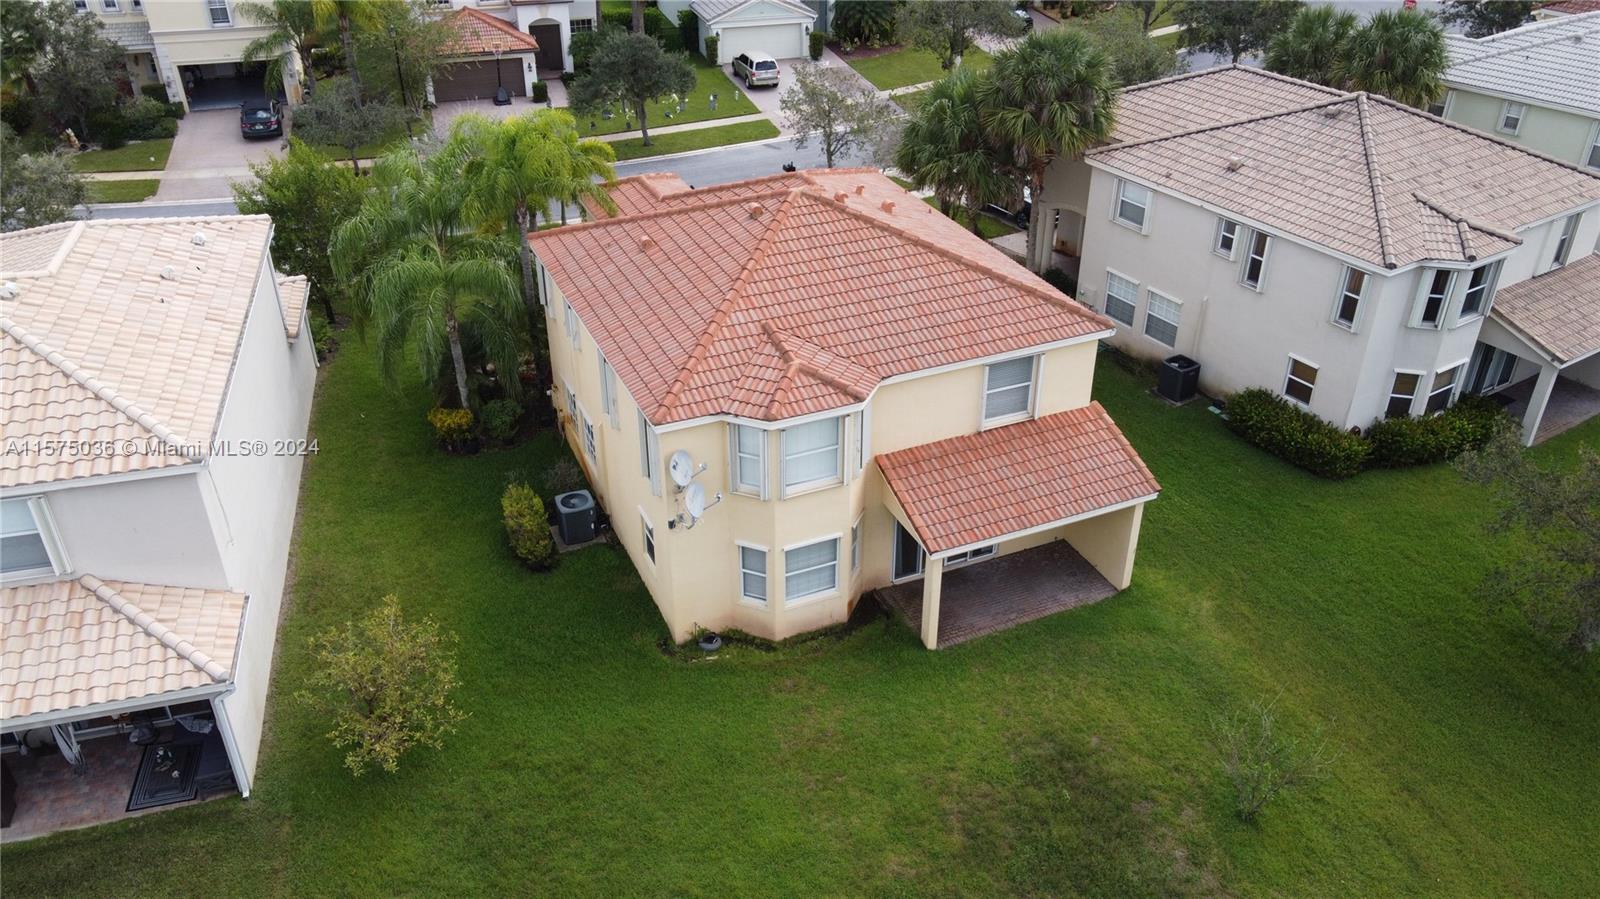 aerial view of a house with a yard and sitting area